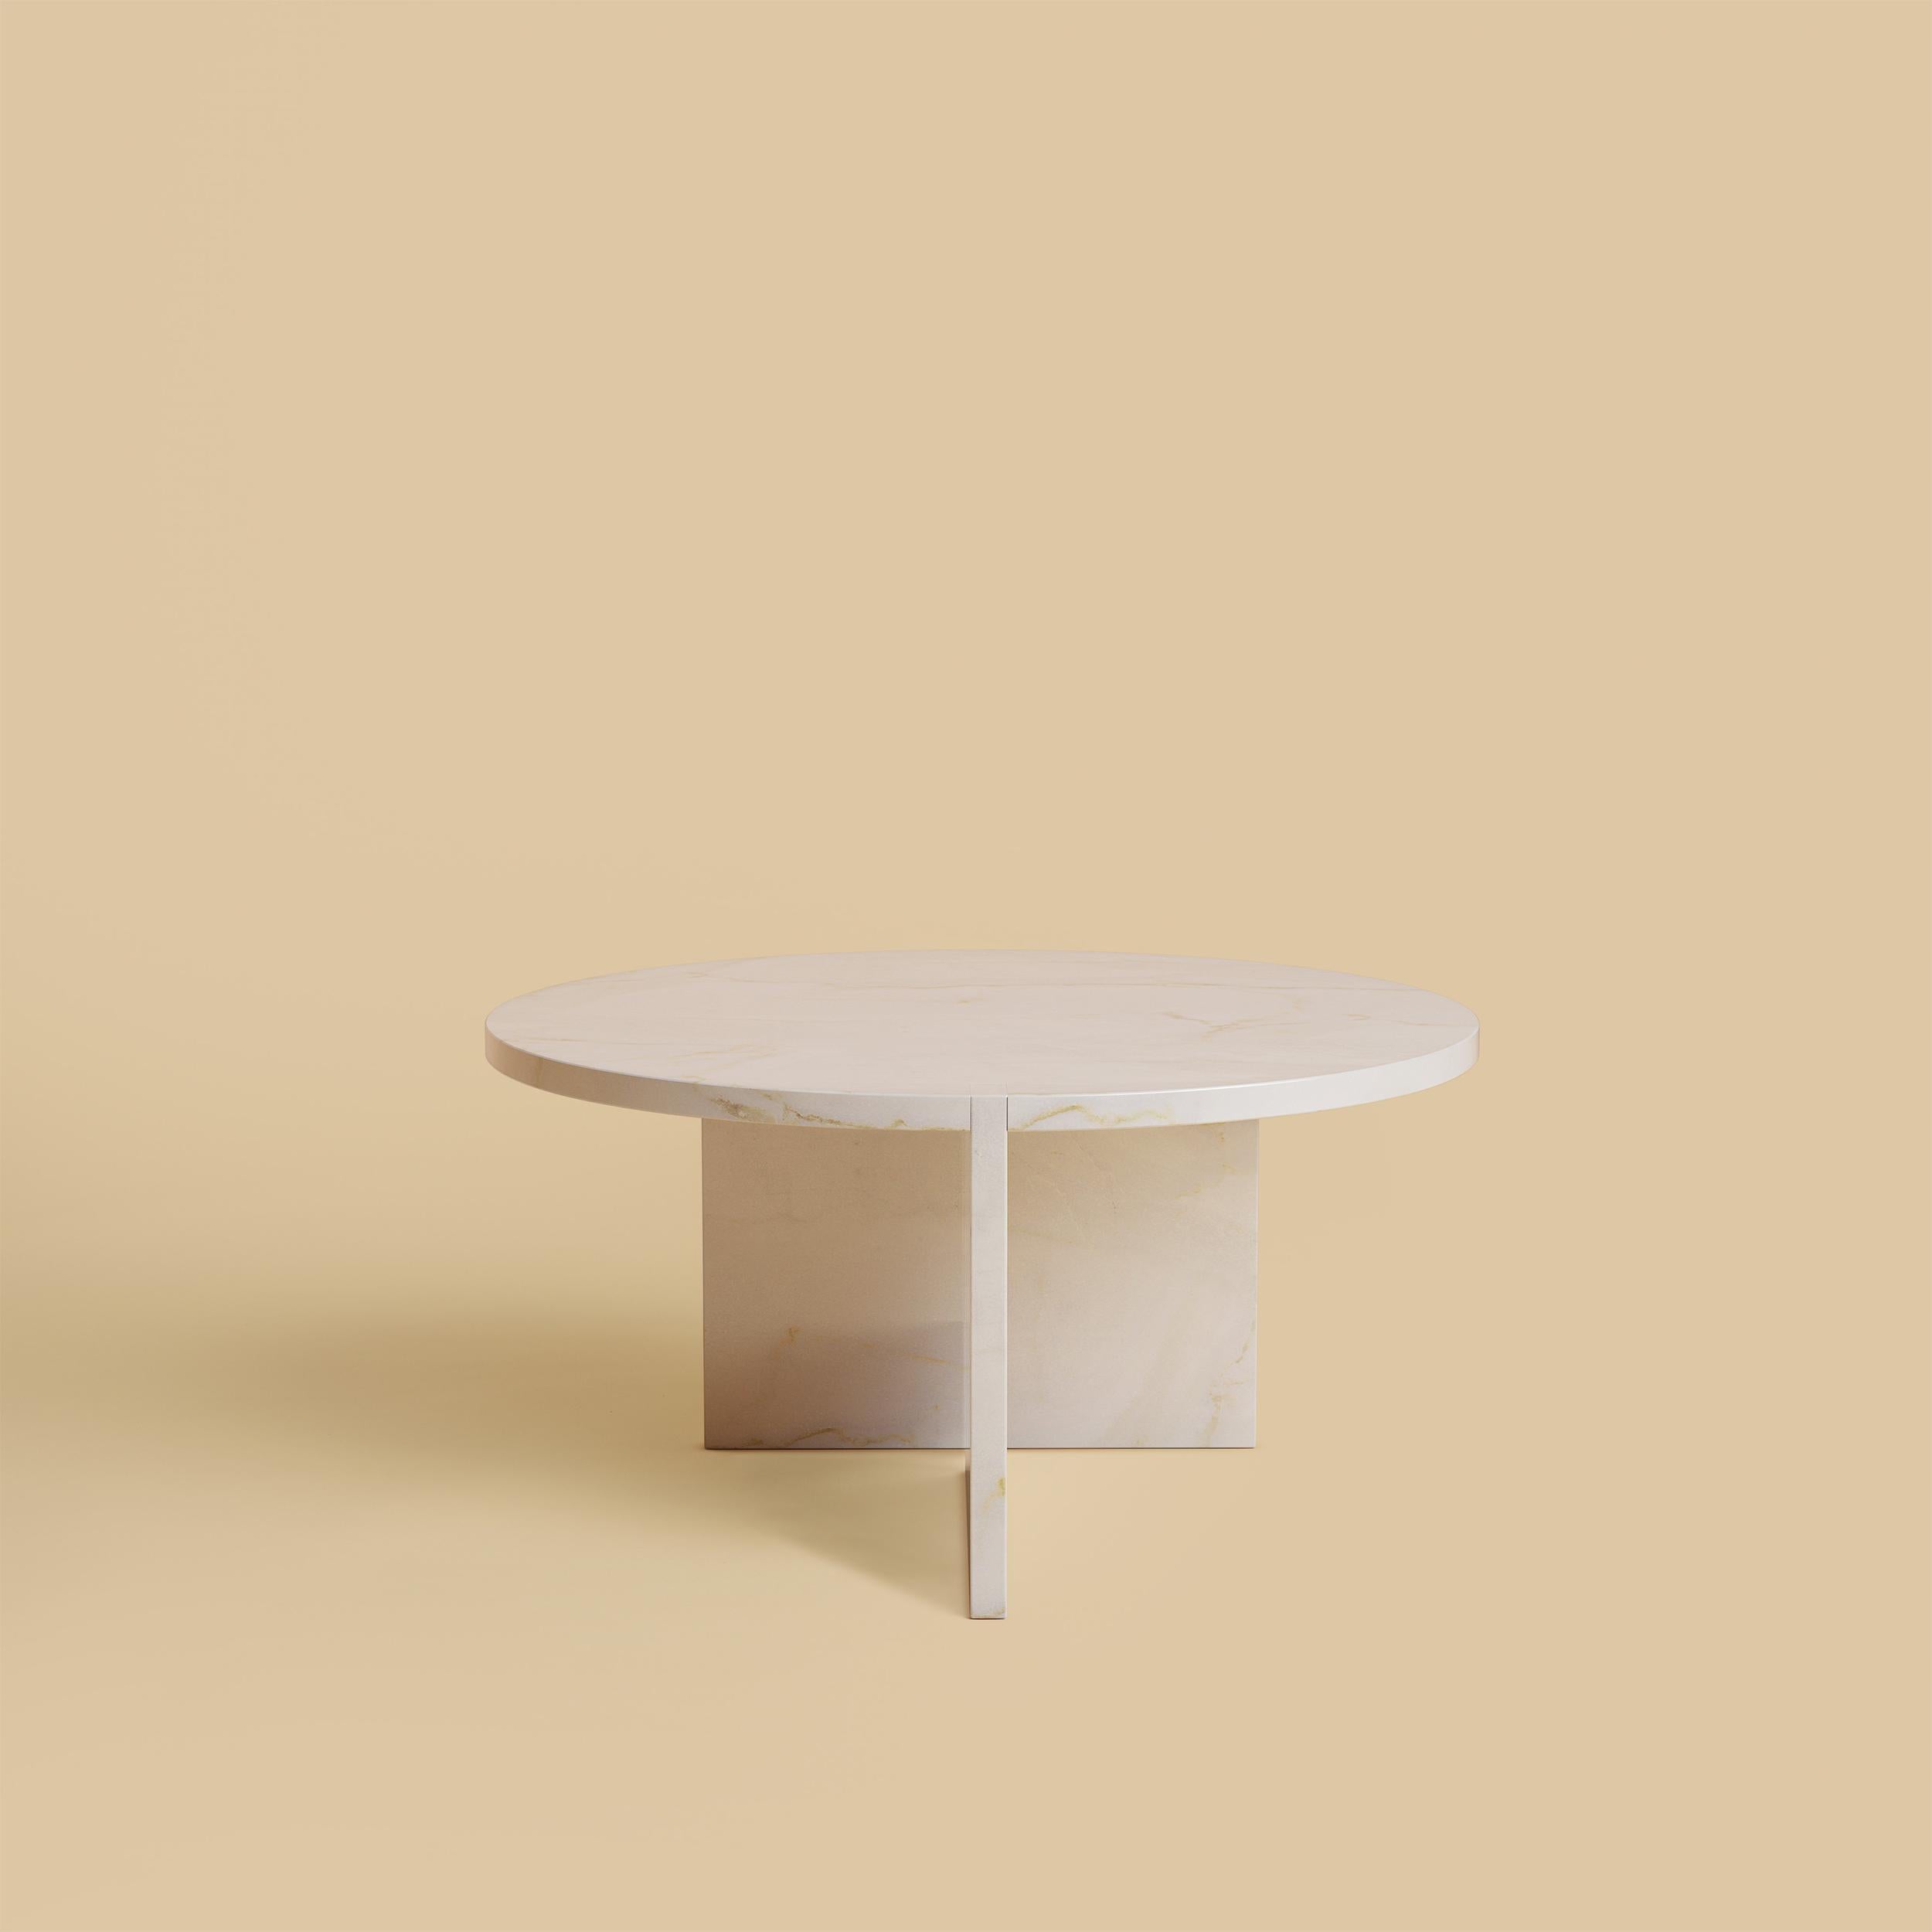 The Hashi coffee table is made entirely of Italian calacatta gold marble from Tuscany. The top is circular and 60 cm in diameter, the legs are made from two marble boards in which one part is inlaid on the top as a very elegant detail.
Artisanal